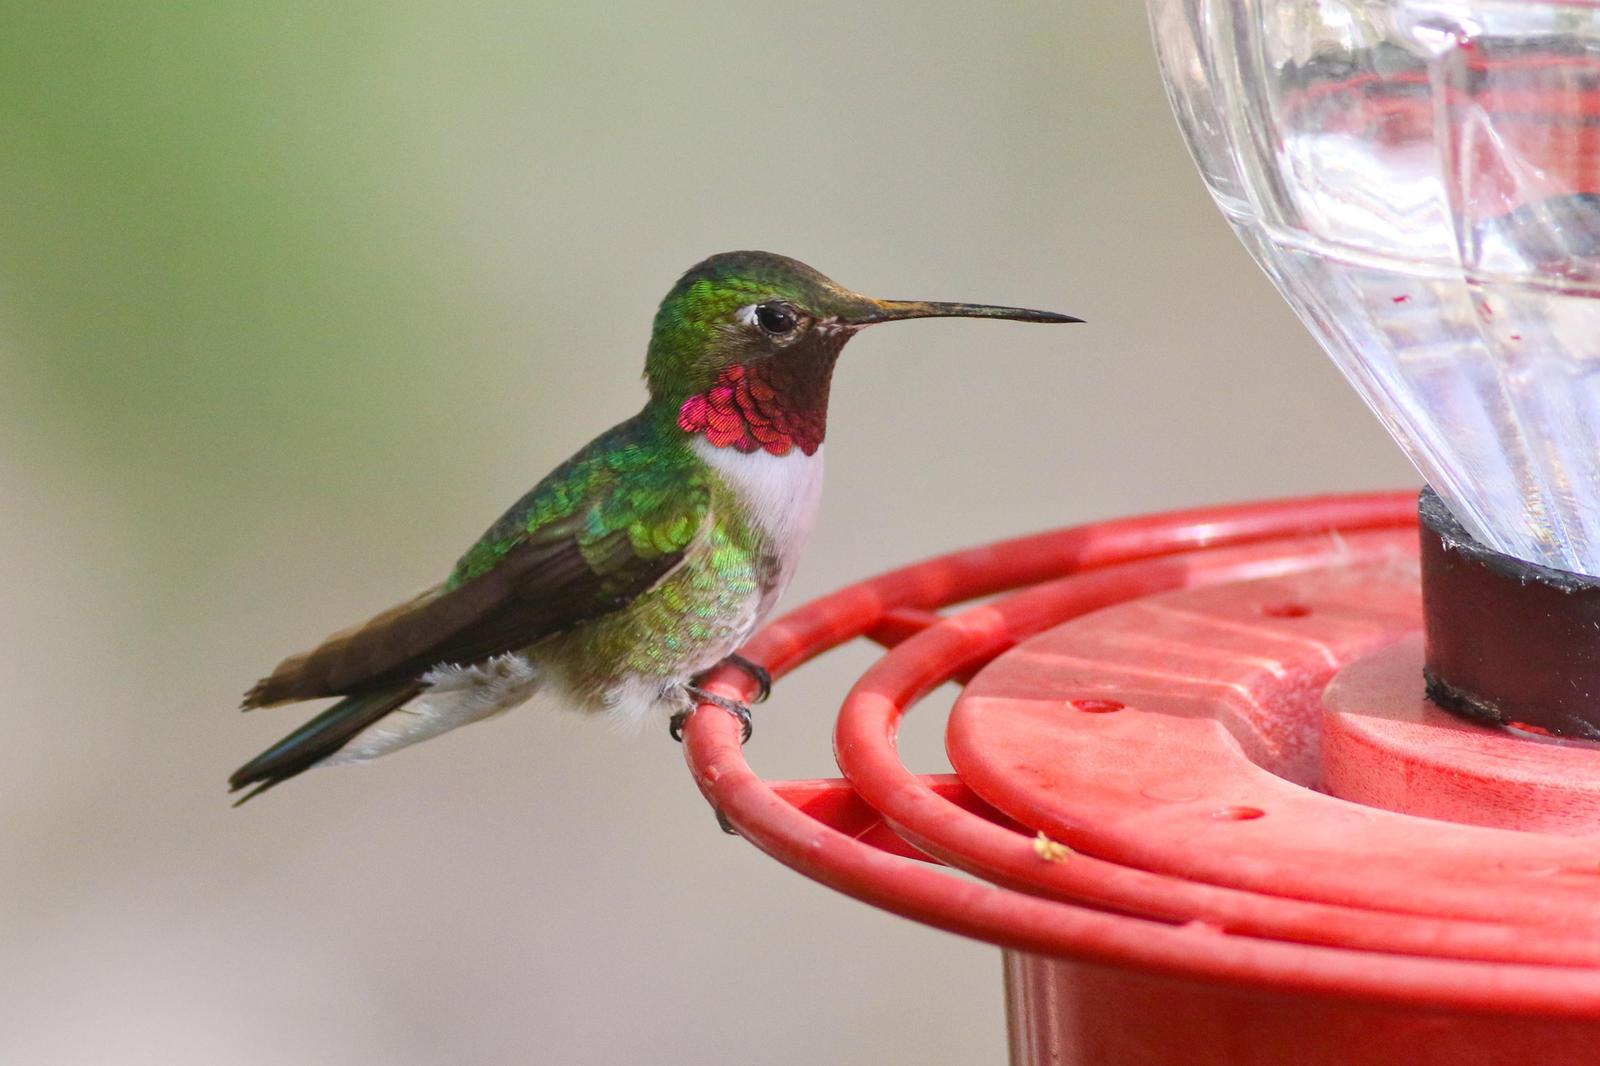 Broad-tailed Hummingbird Photo by Tom Ford-Hutchinson